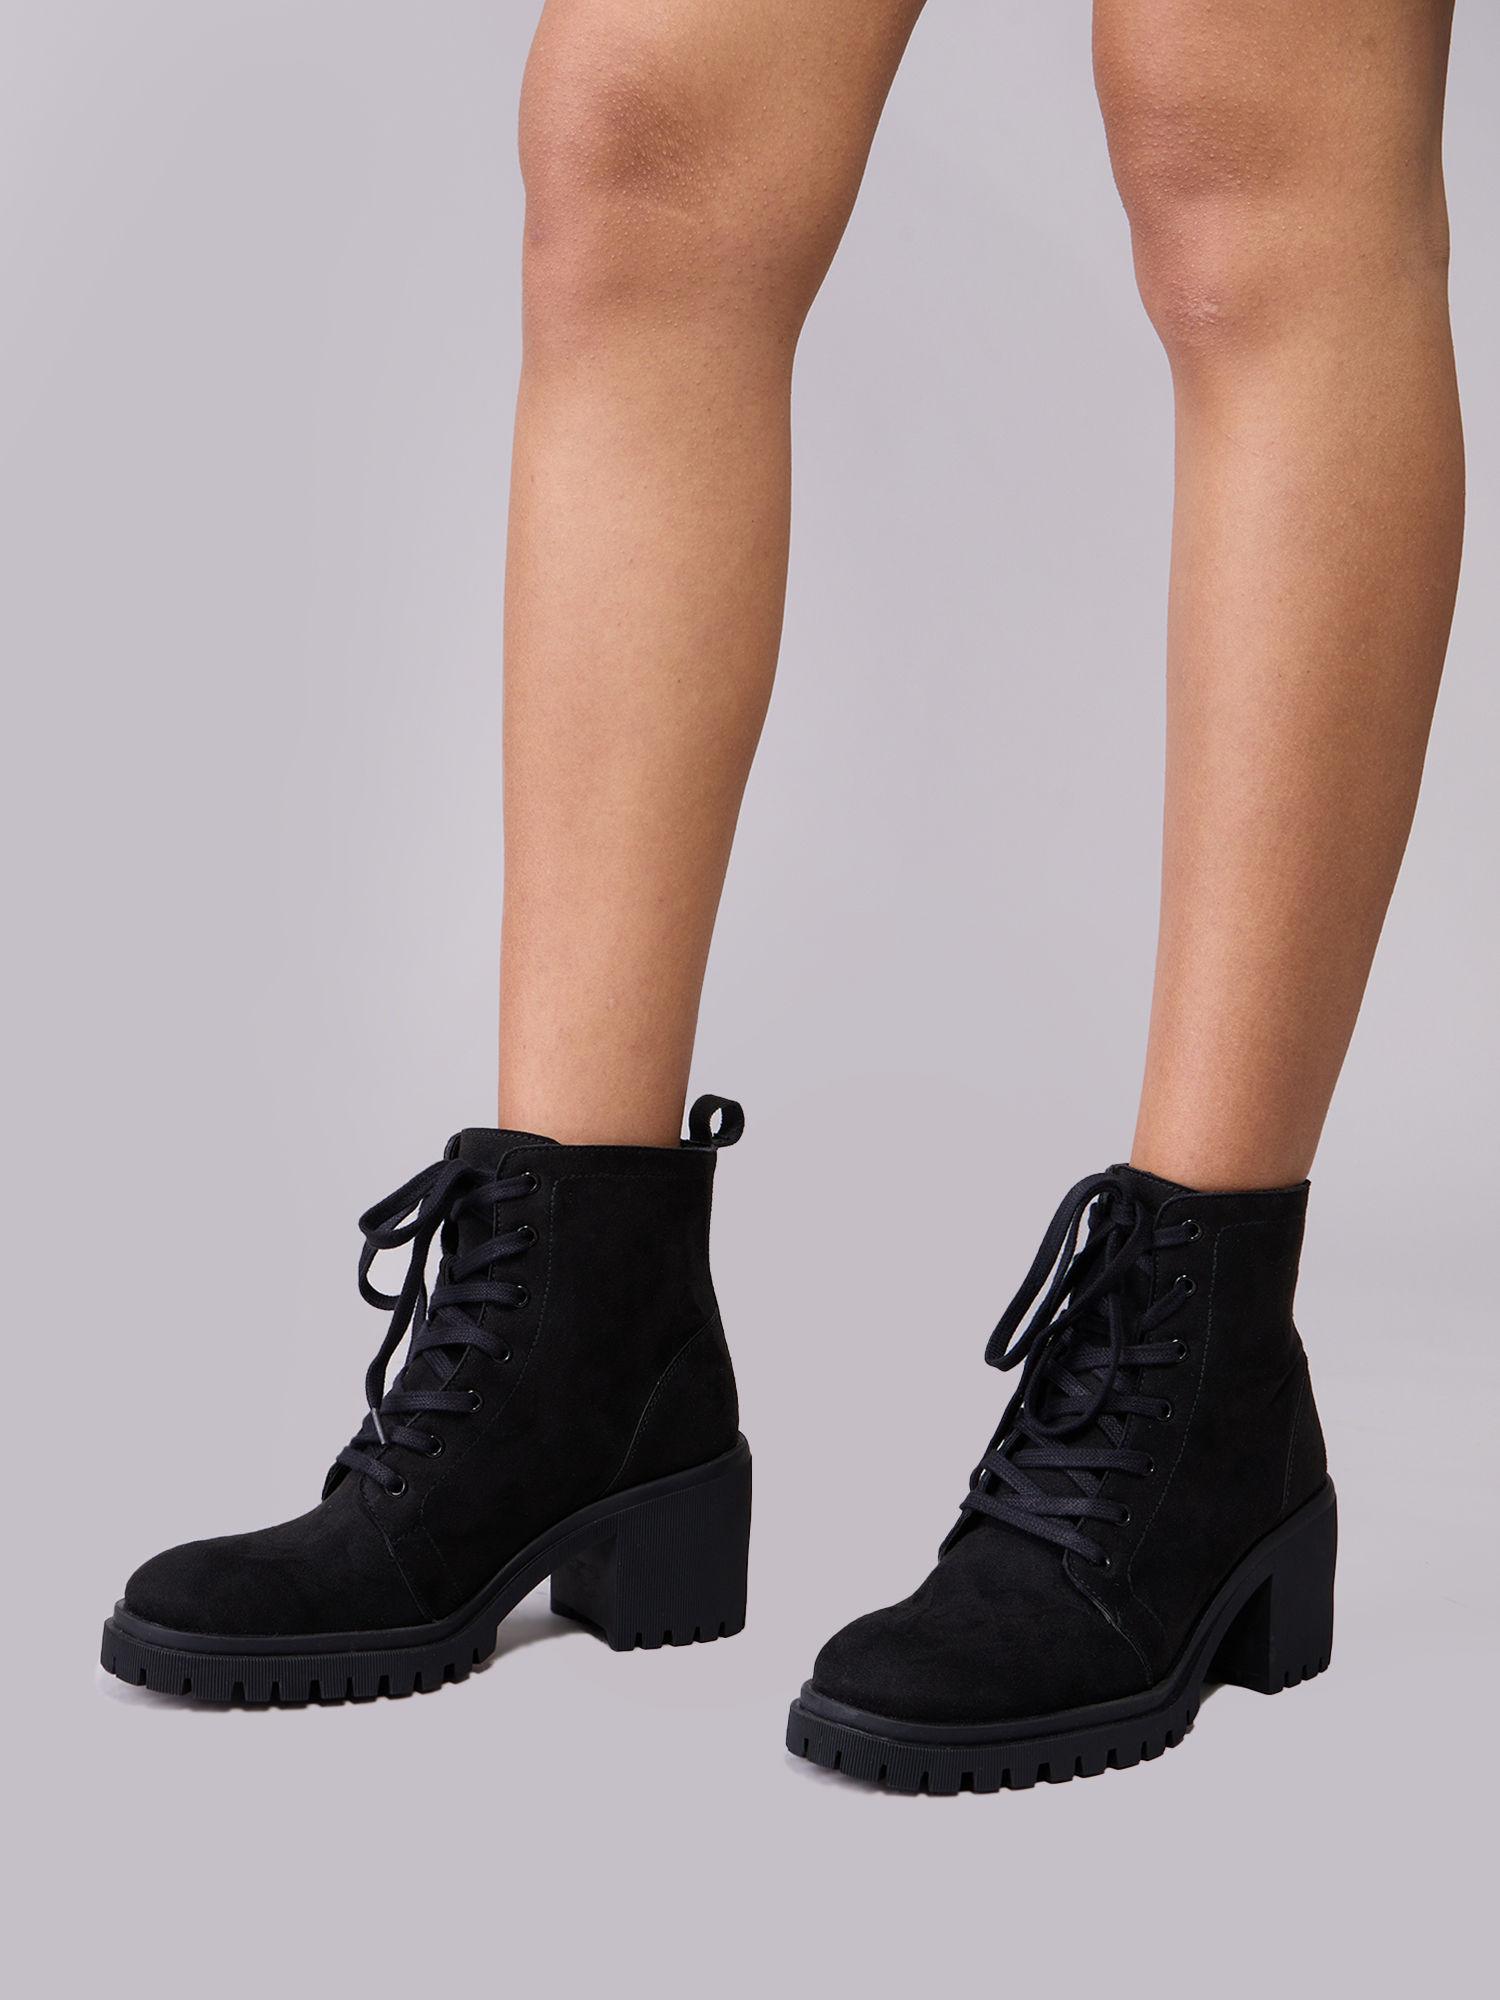 black textured laced up high ankle winter boots